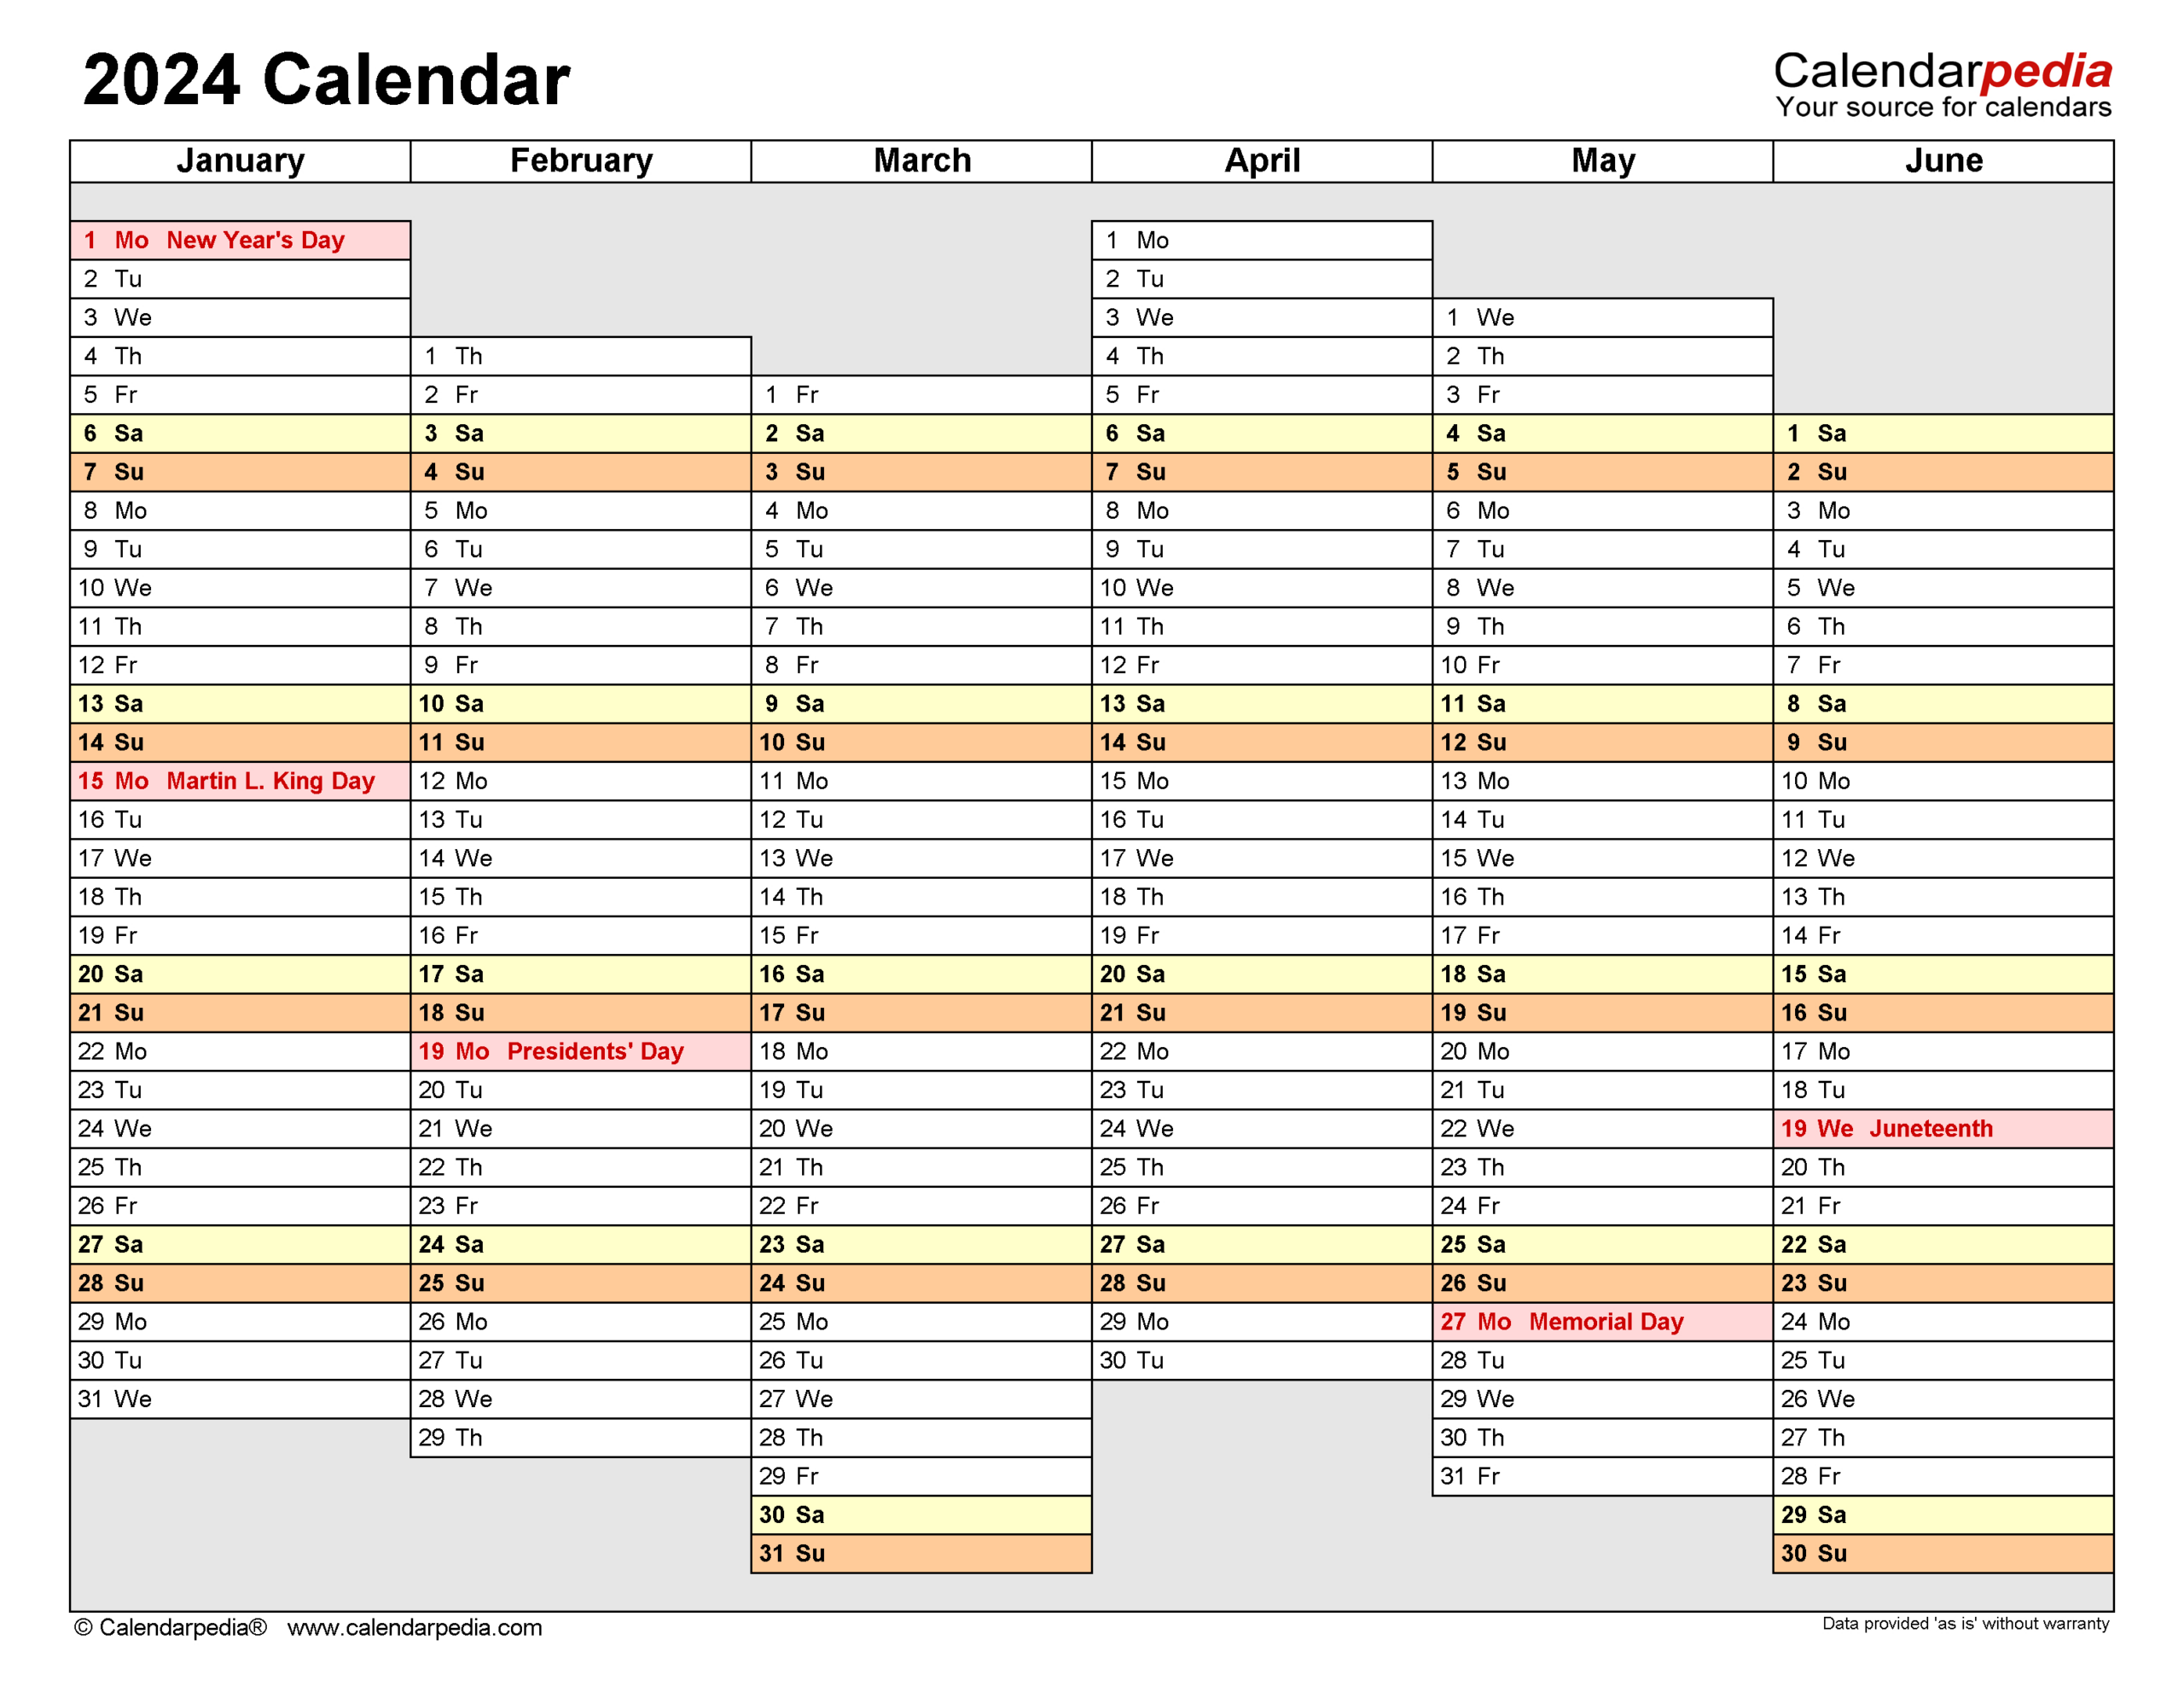 2024 Calendar - Free Printable Excel Templates - Calendarpedia | 2024 Yearly Calendar And Planner